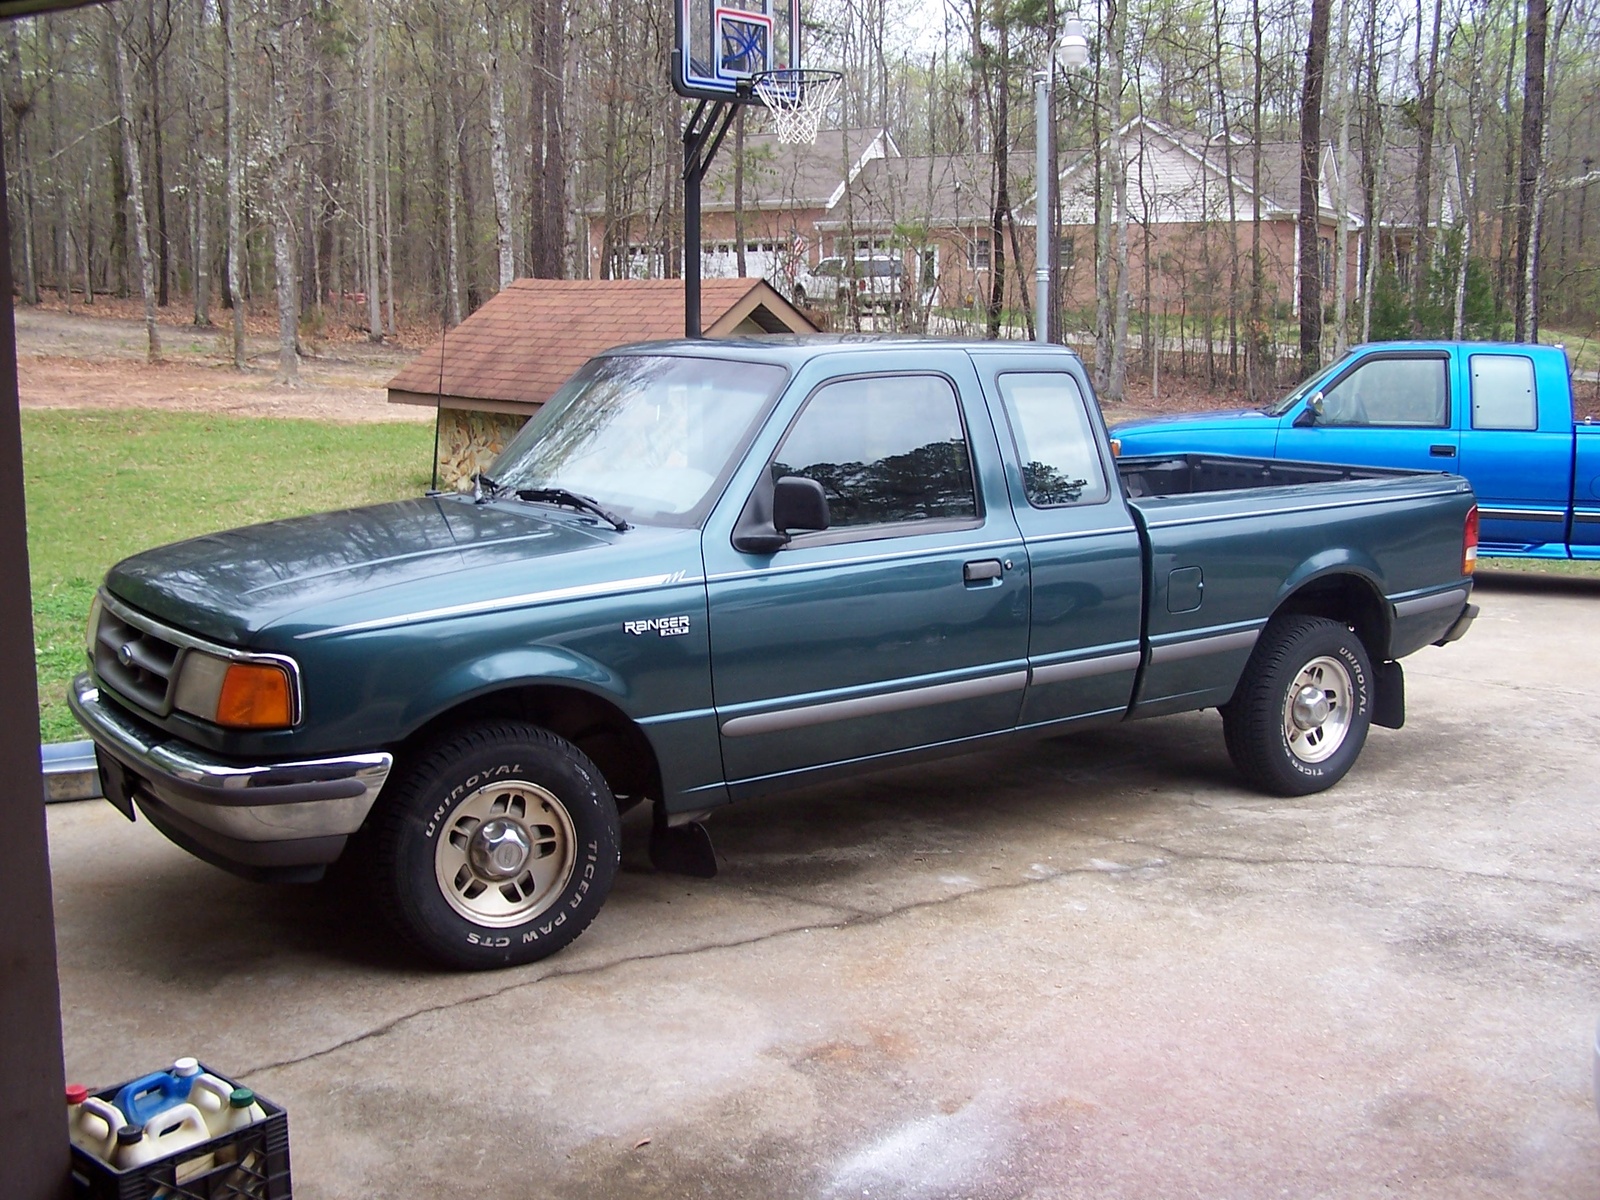 1996 Ford ranger extended cab reviews #7